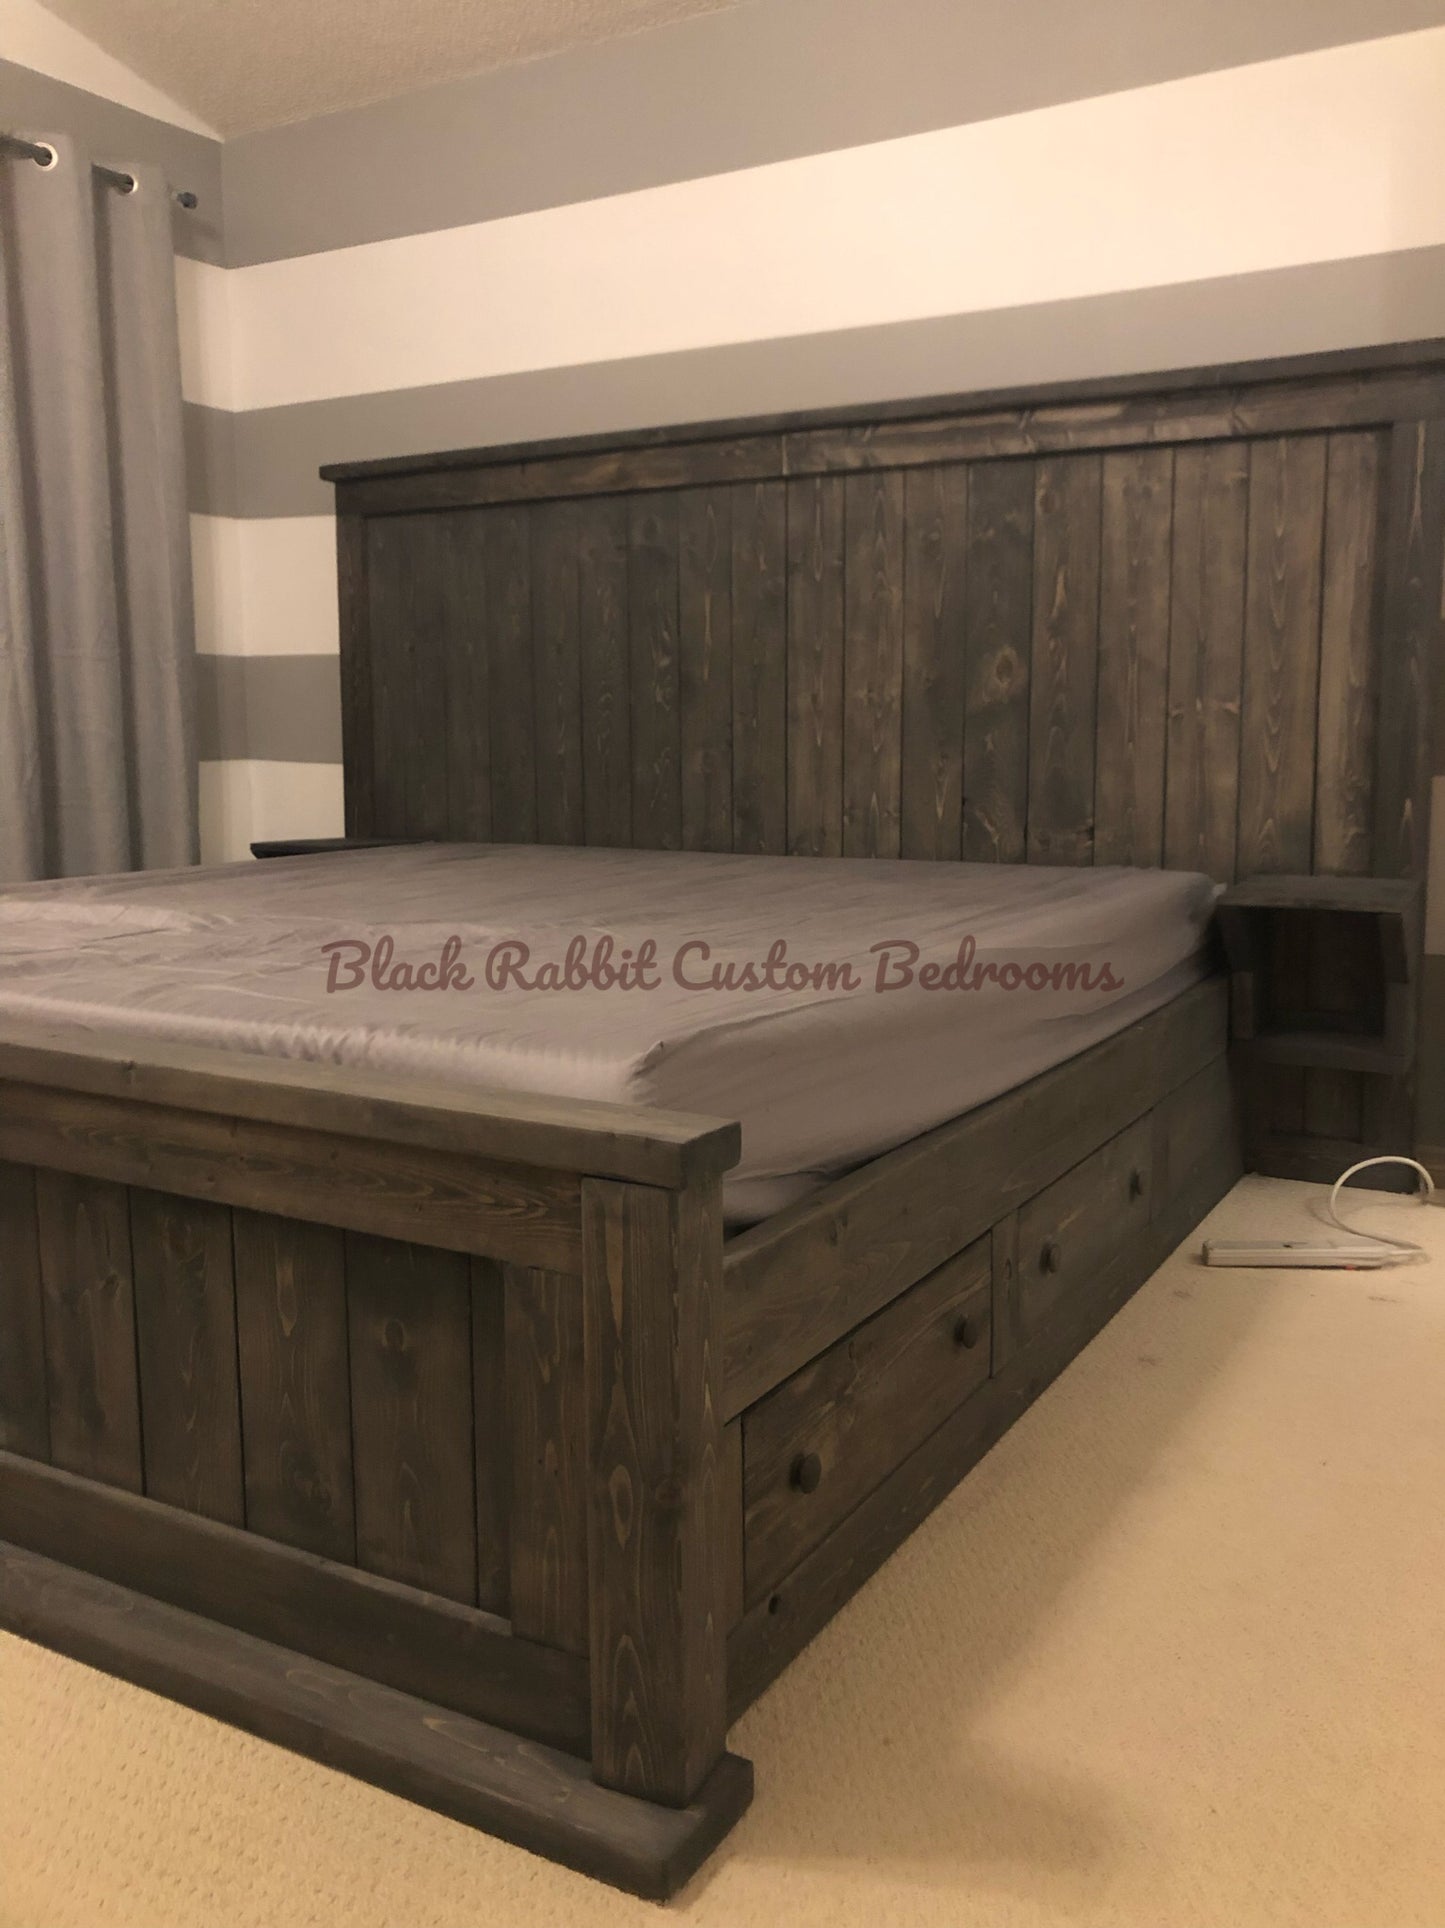 Dave Bed- Standard Bed or Captain’s Bed